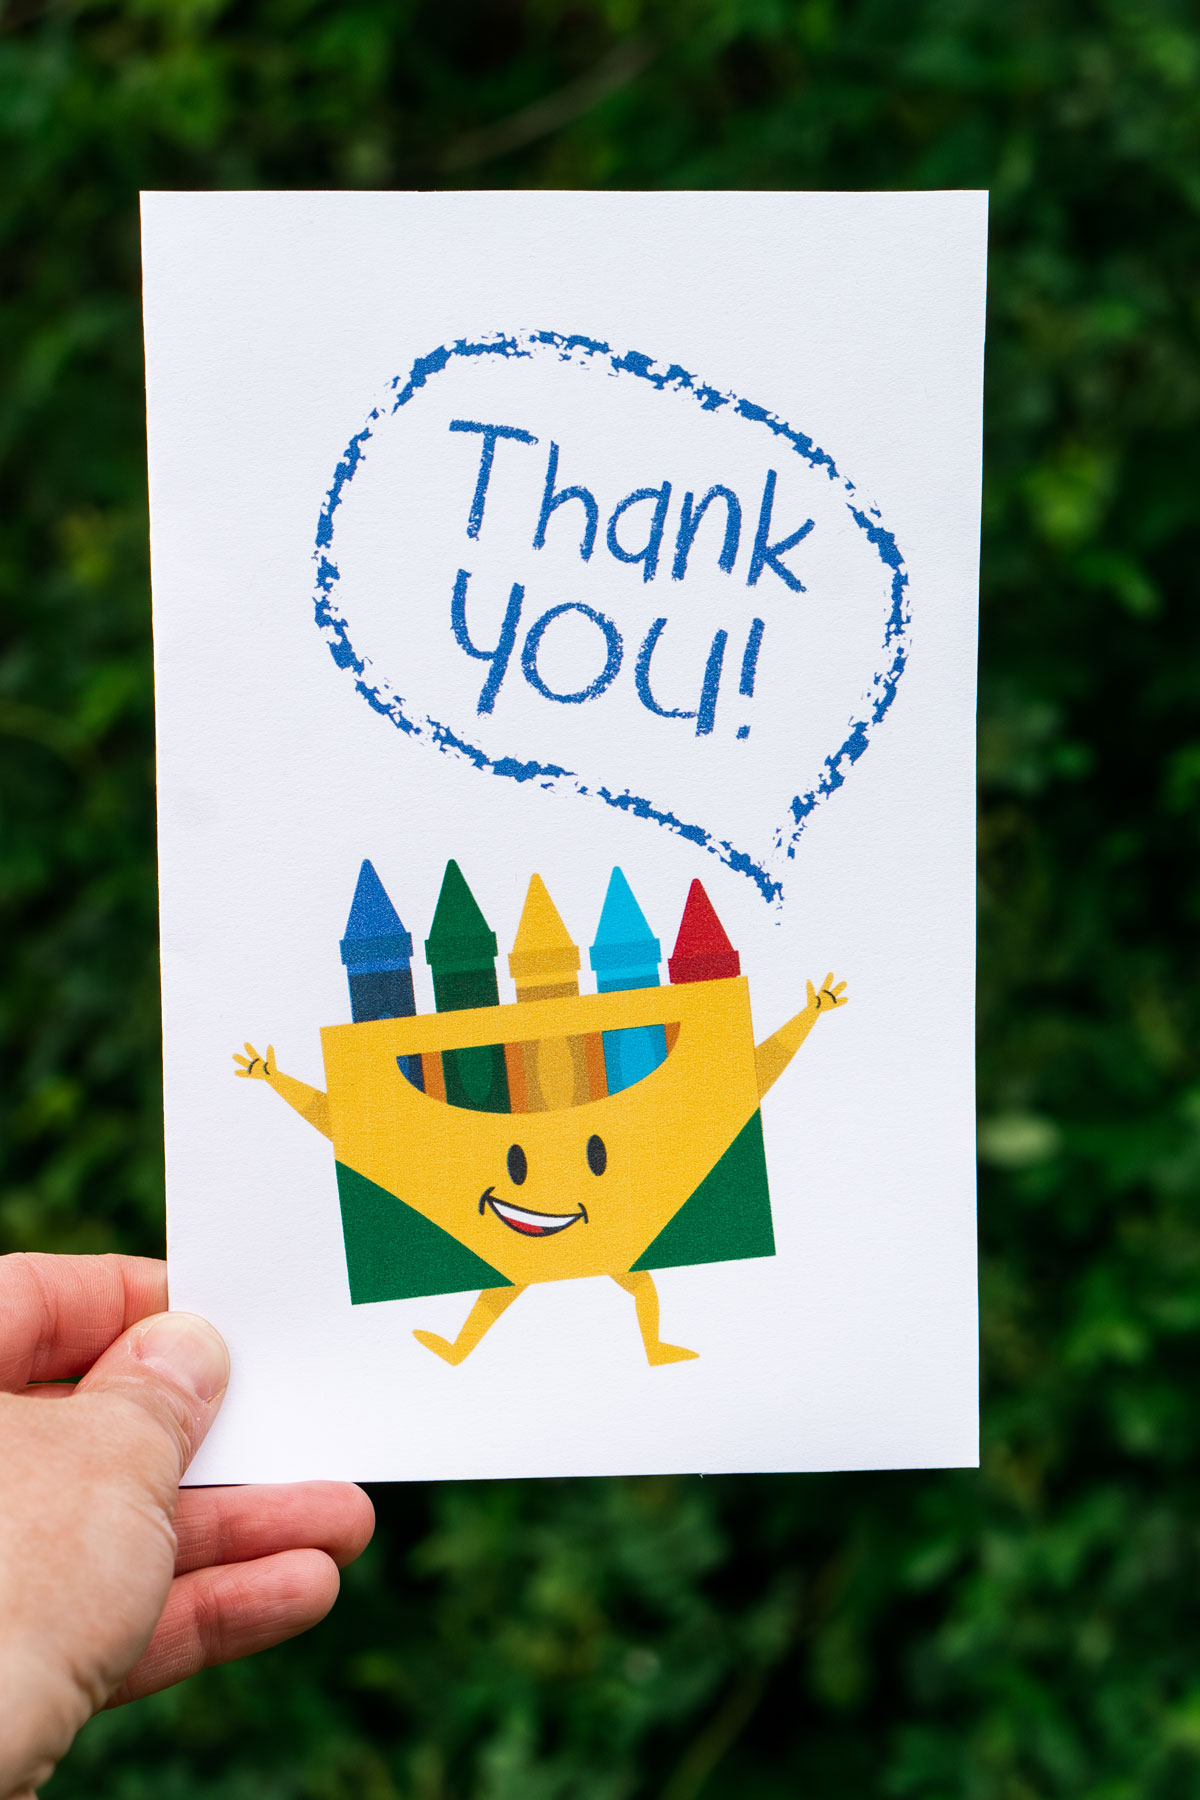 This image is of someone holding one of the free printable thank you cards for teacher appreciation or the end of the year. It has a pack of crayons that is saying thank you!